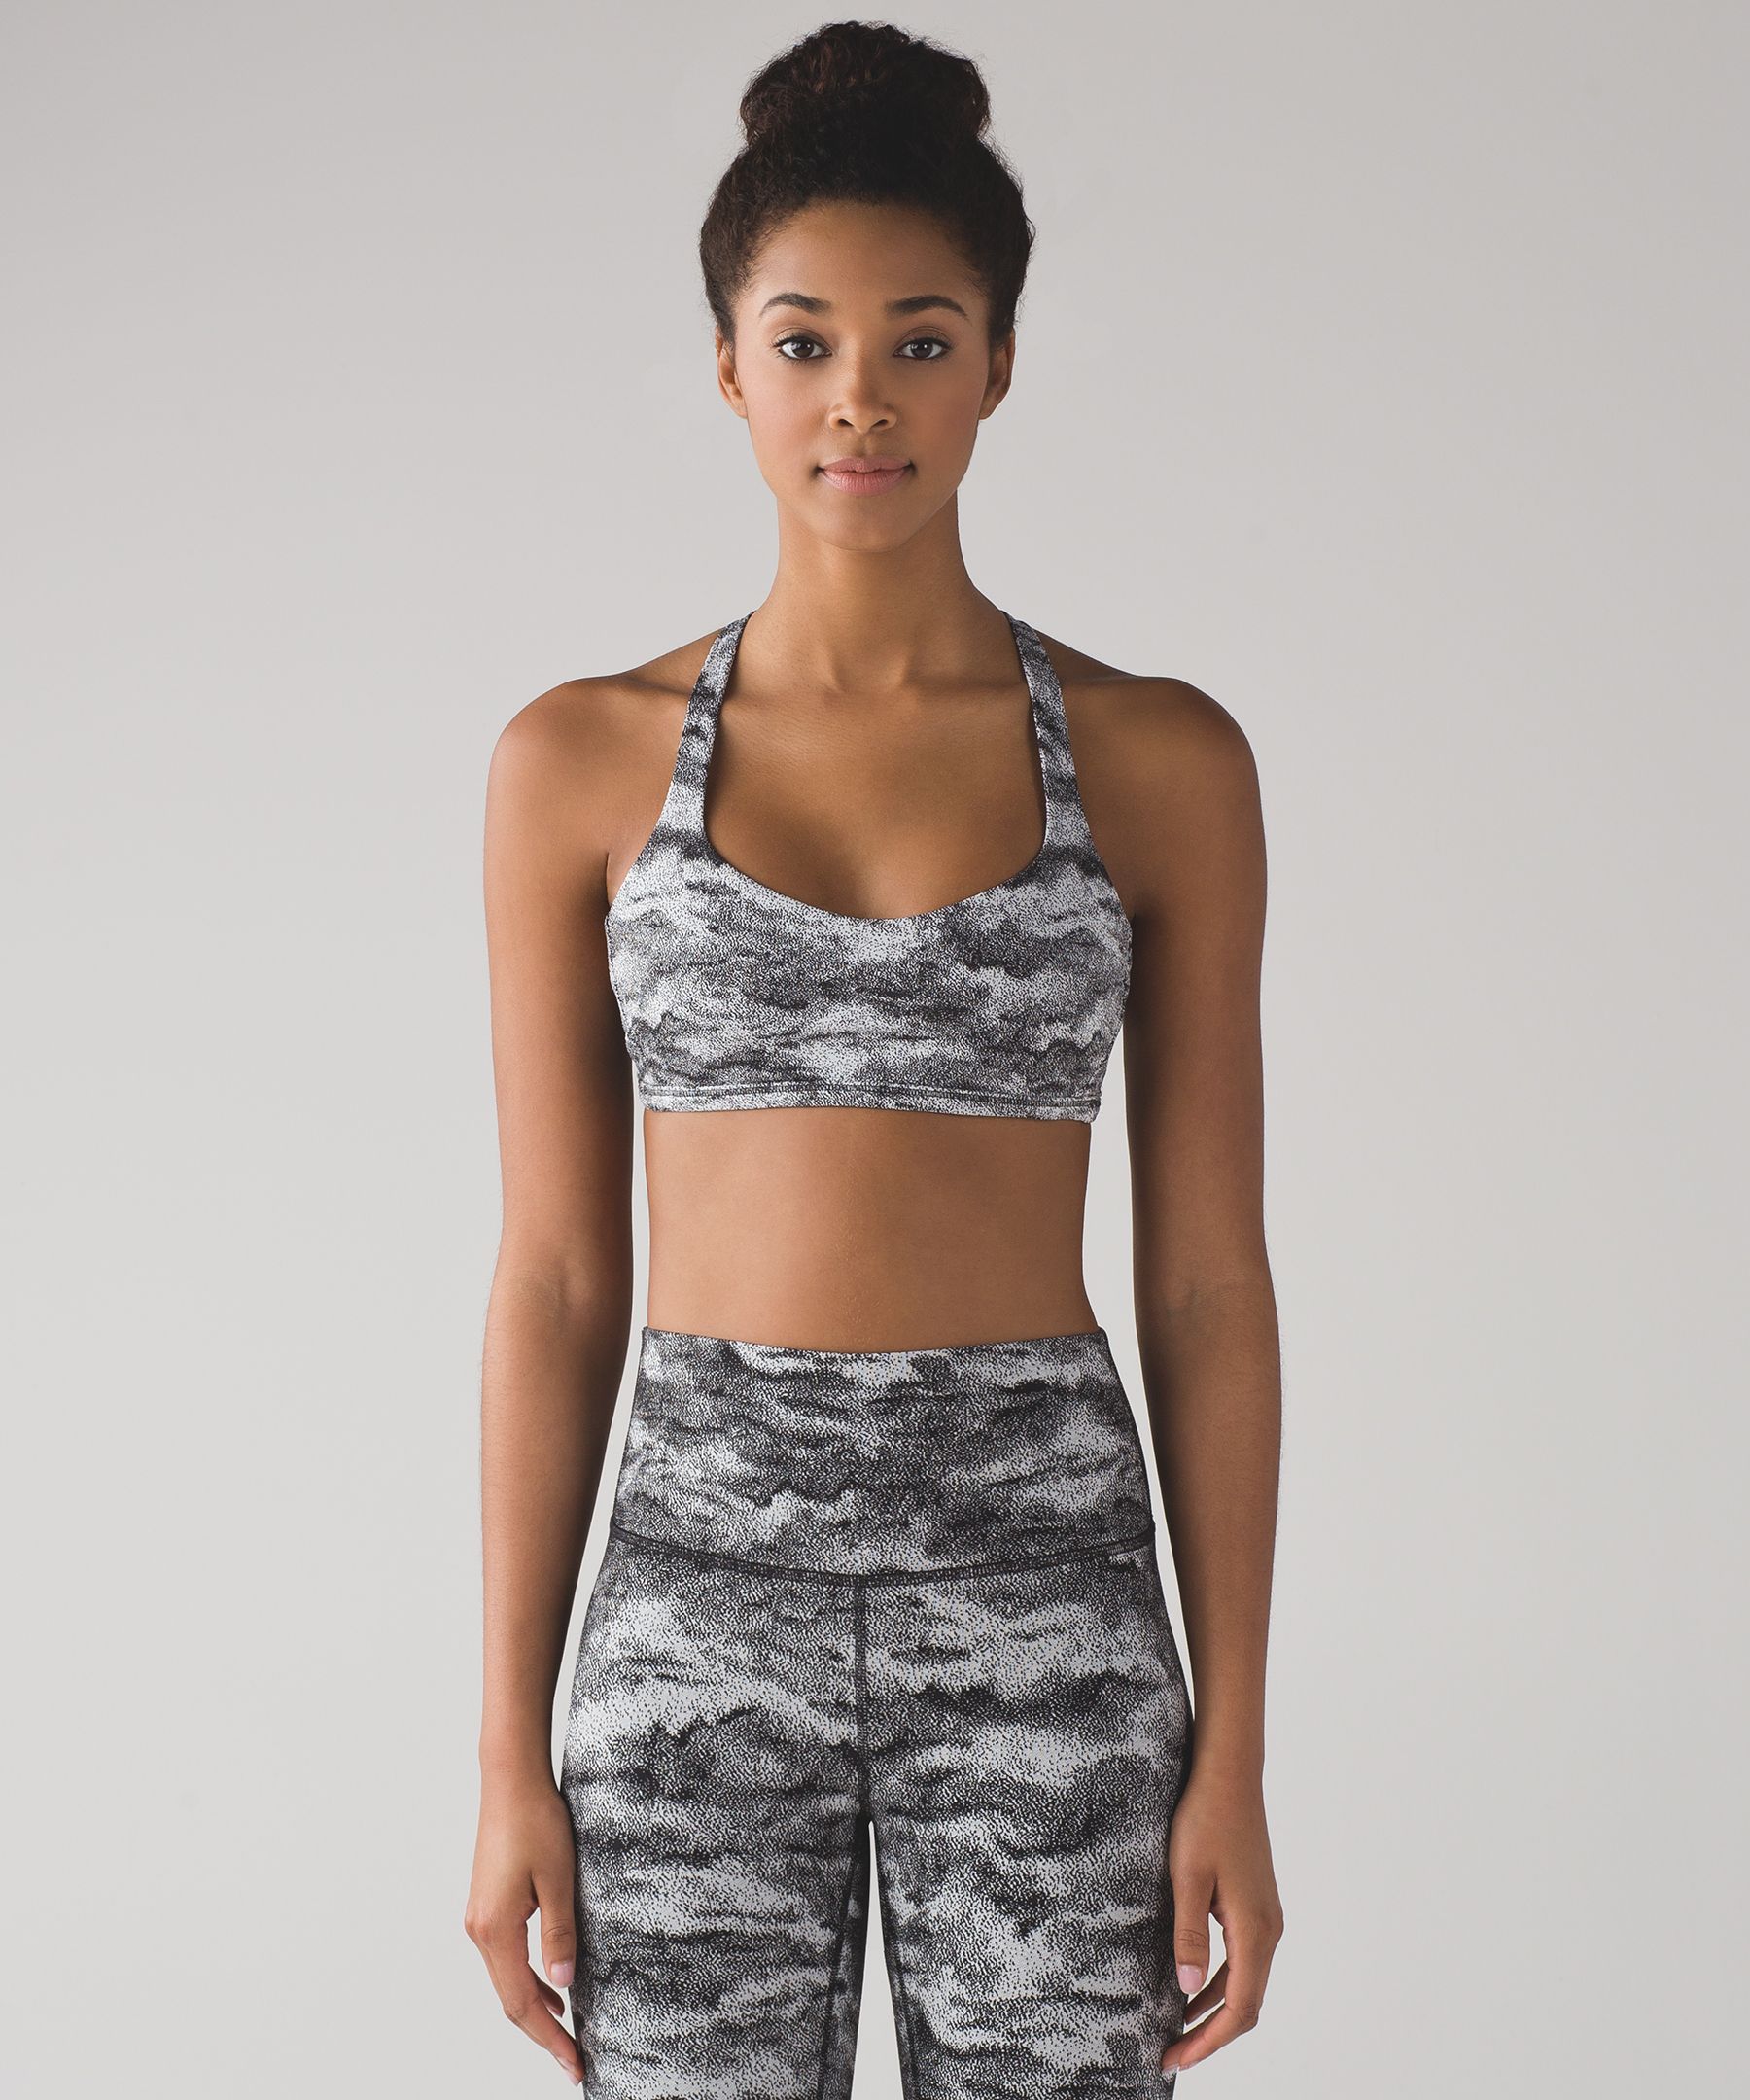 Lululemon Free To Be Bra *Light Support, A/B Cup (Online Only